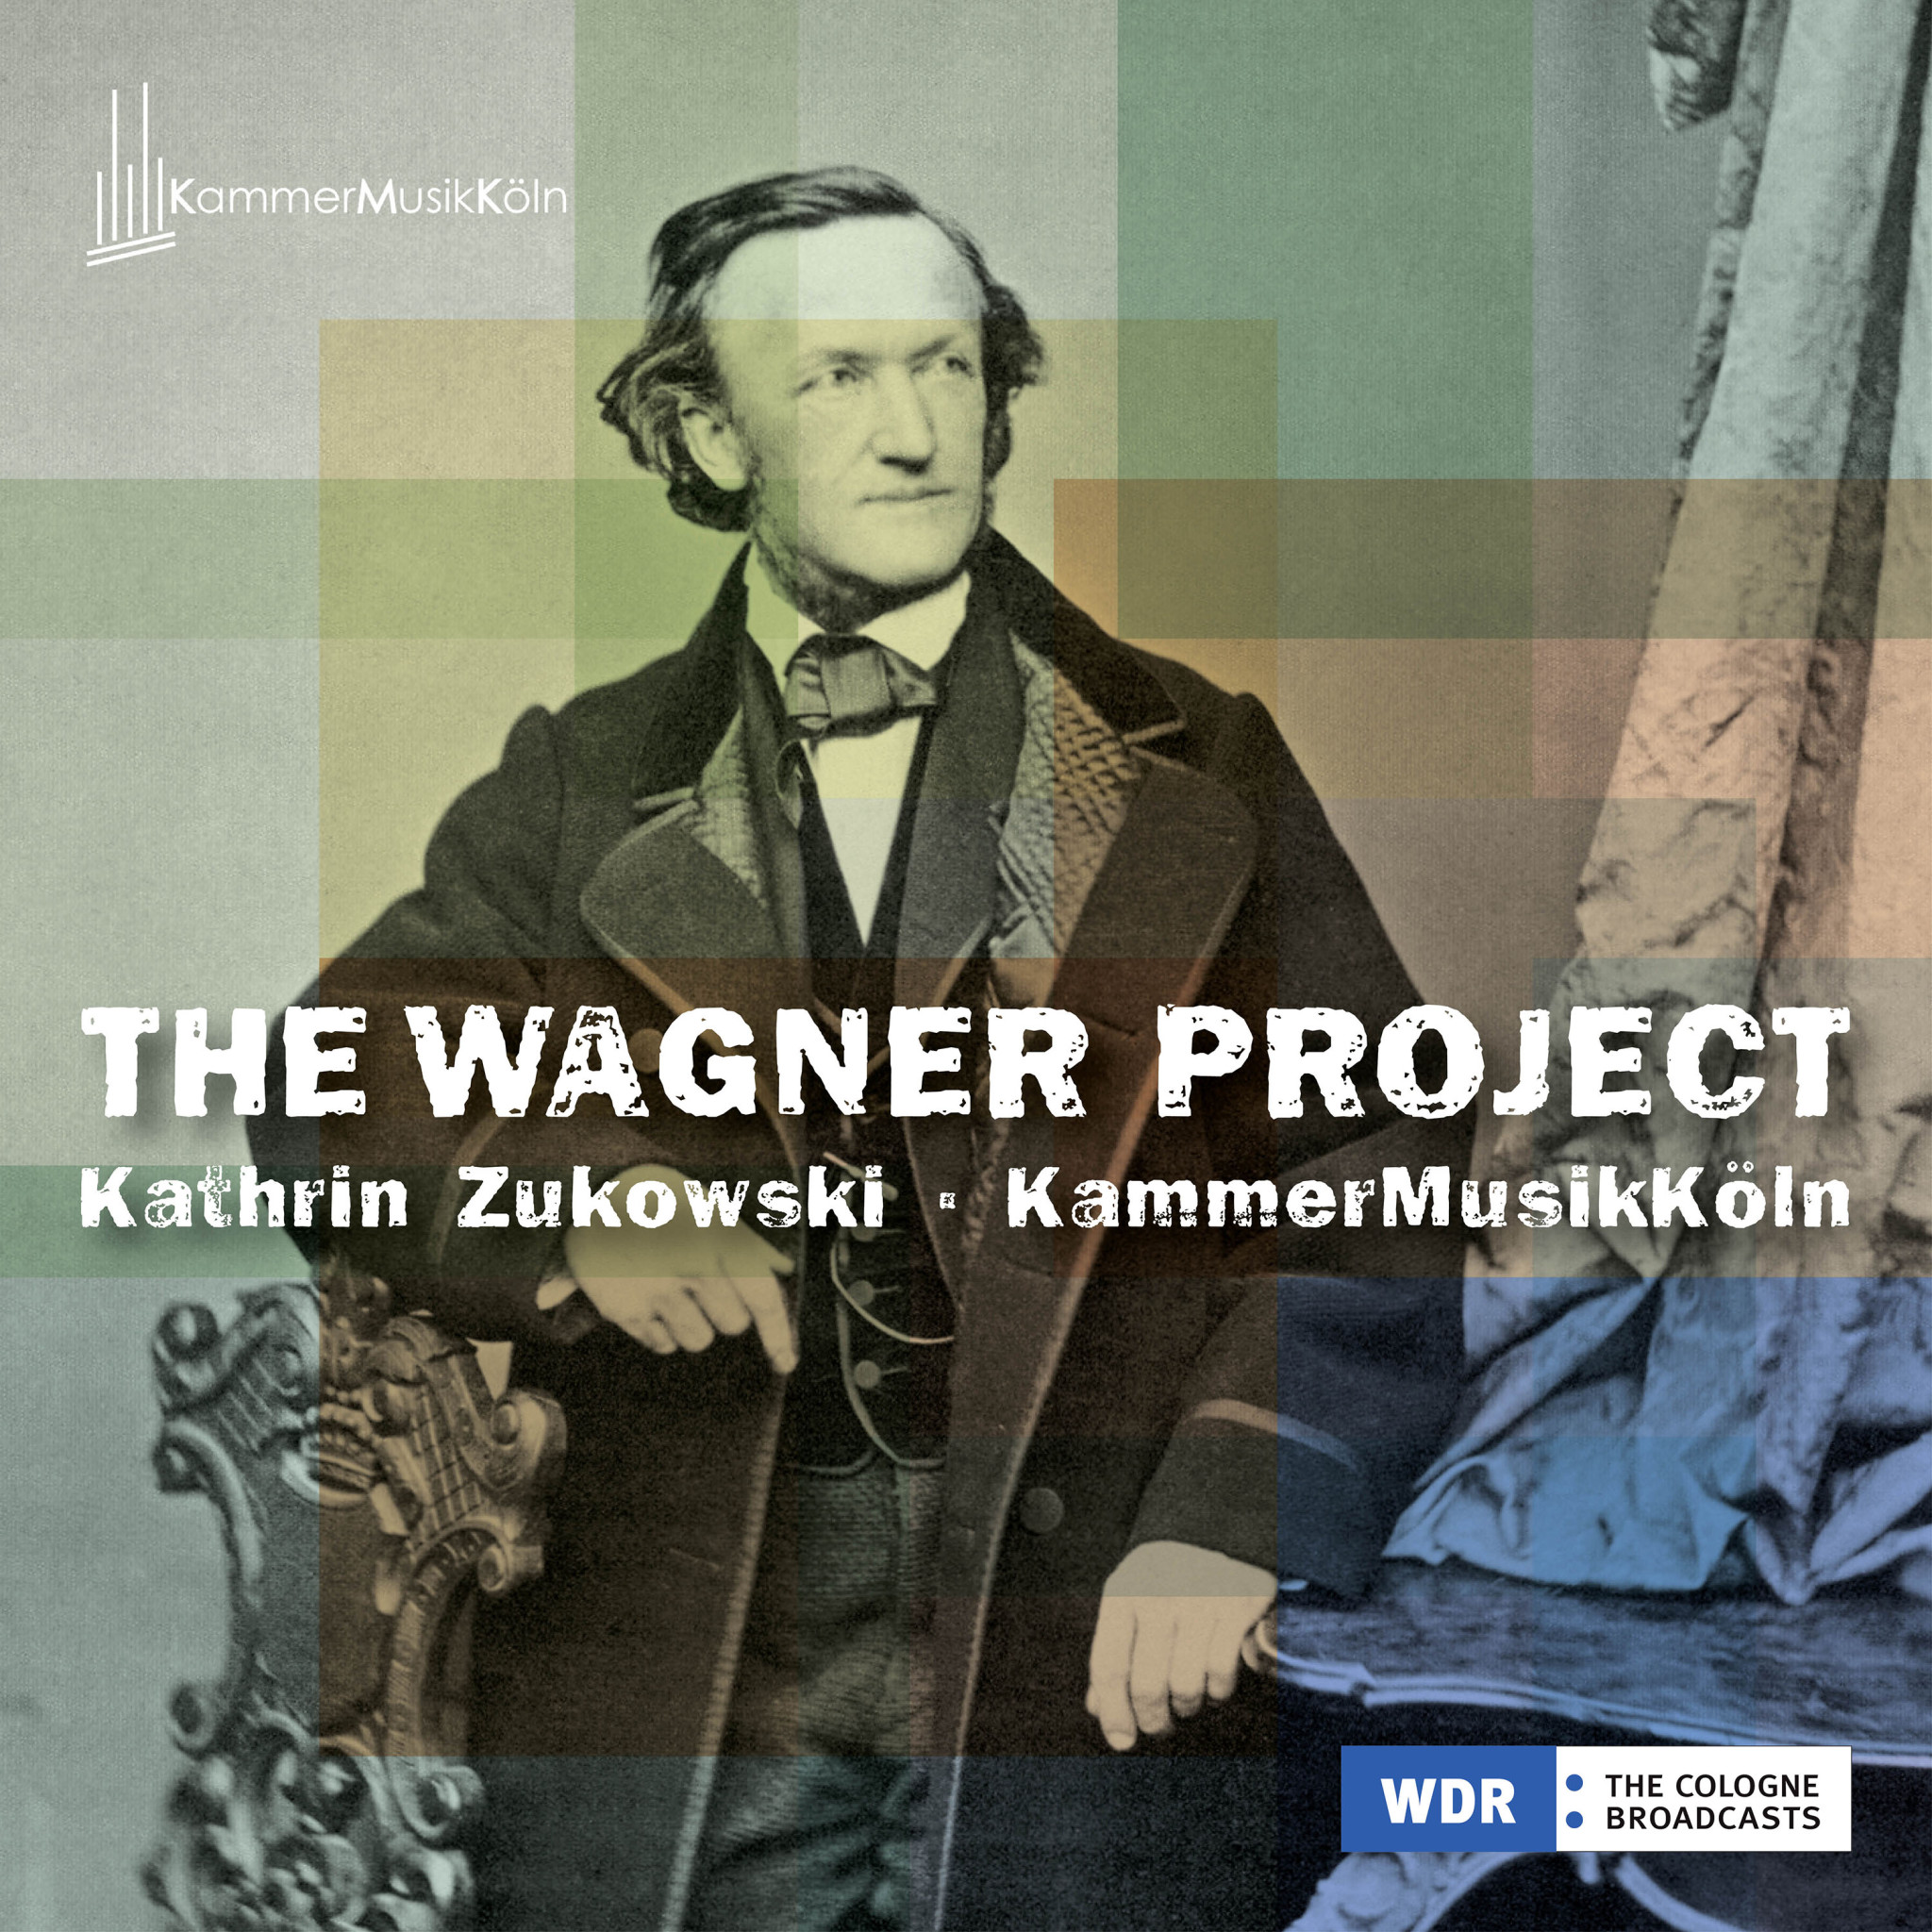 THE WAGNER PROJECT